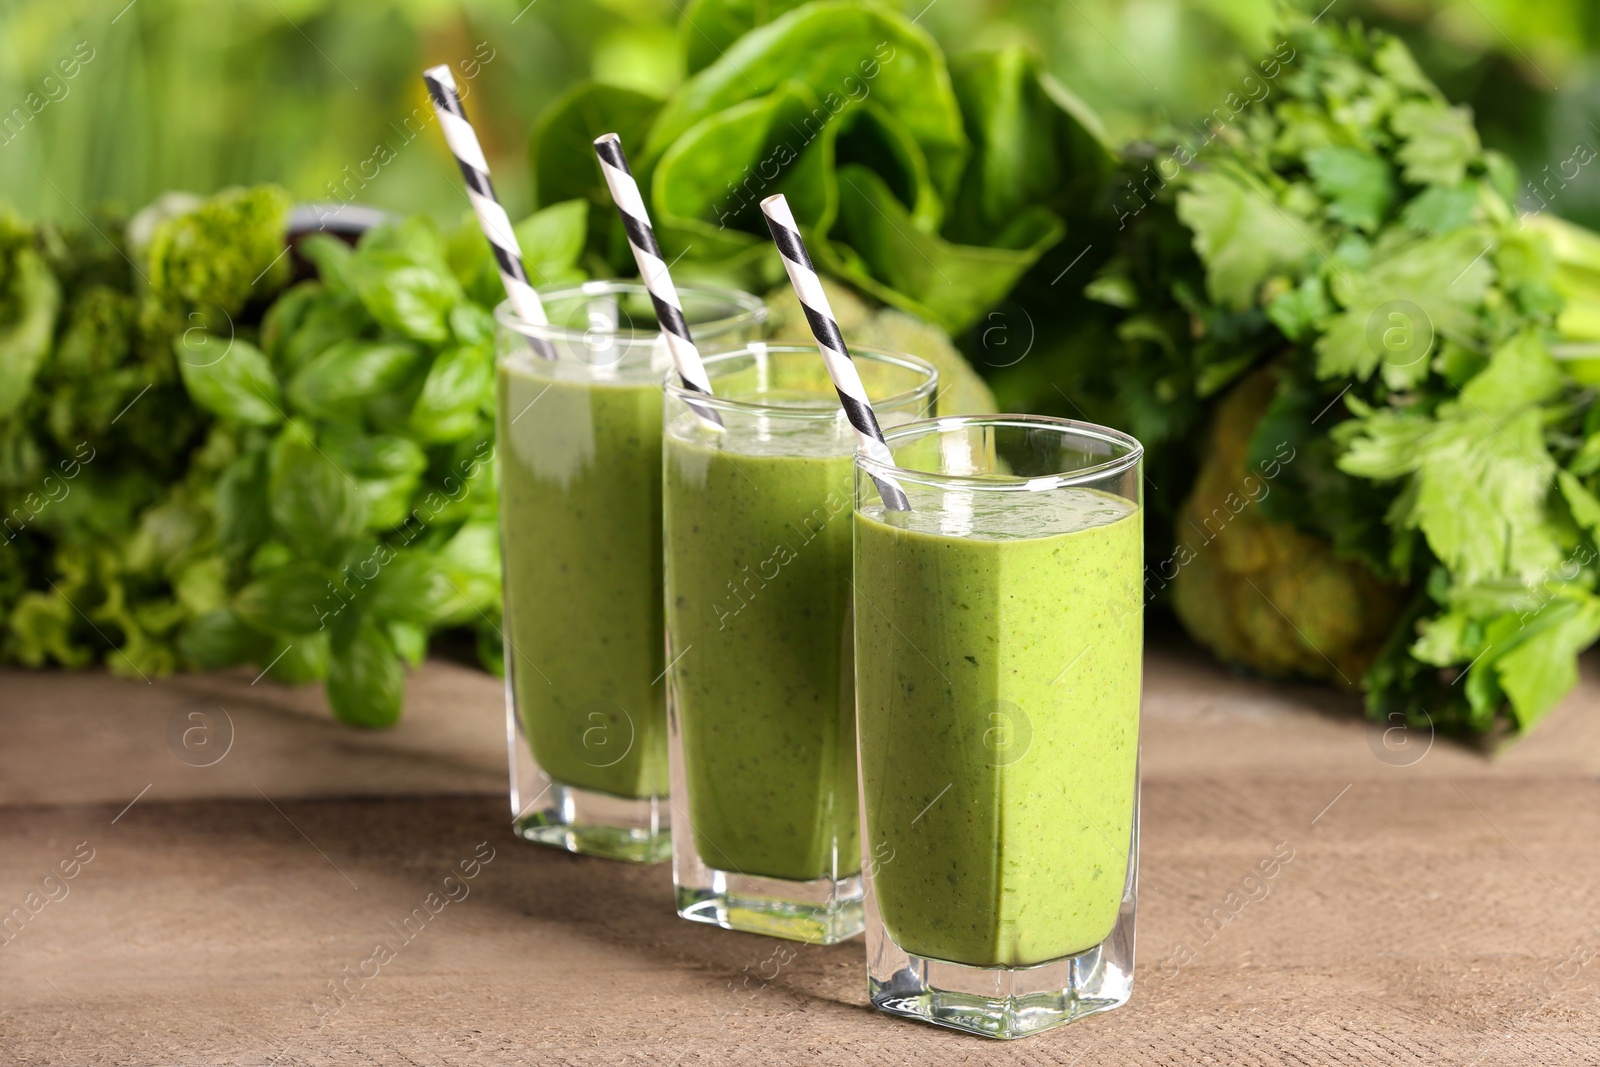 Photo of Glasses of fresh green smoothie and ingredients on wooden table